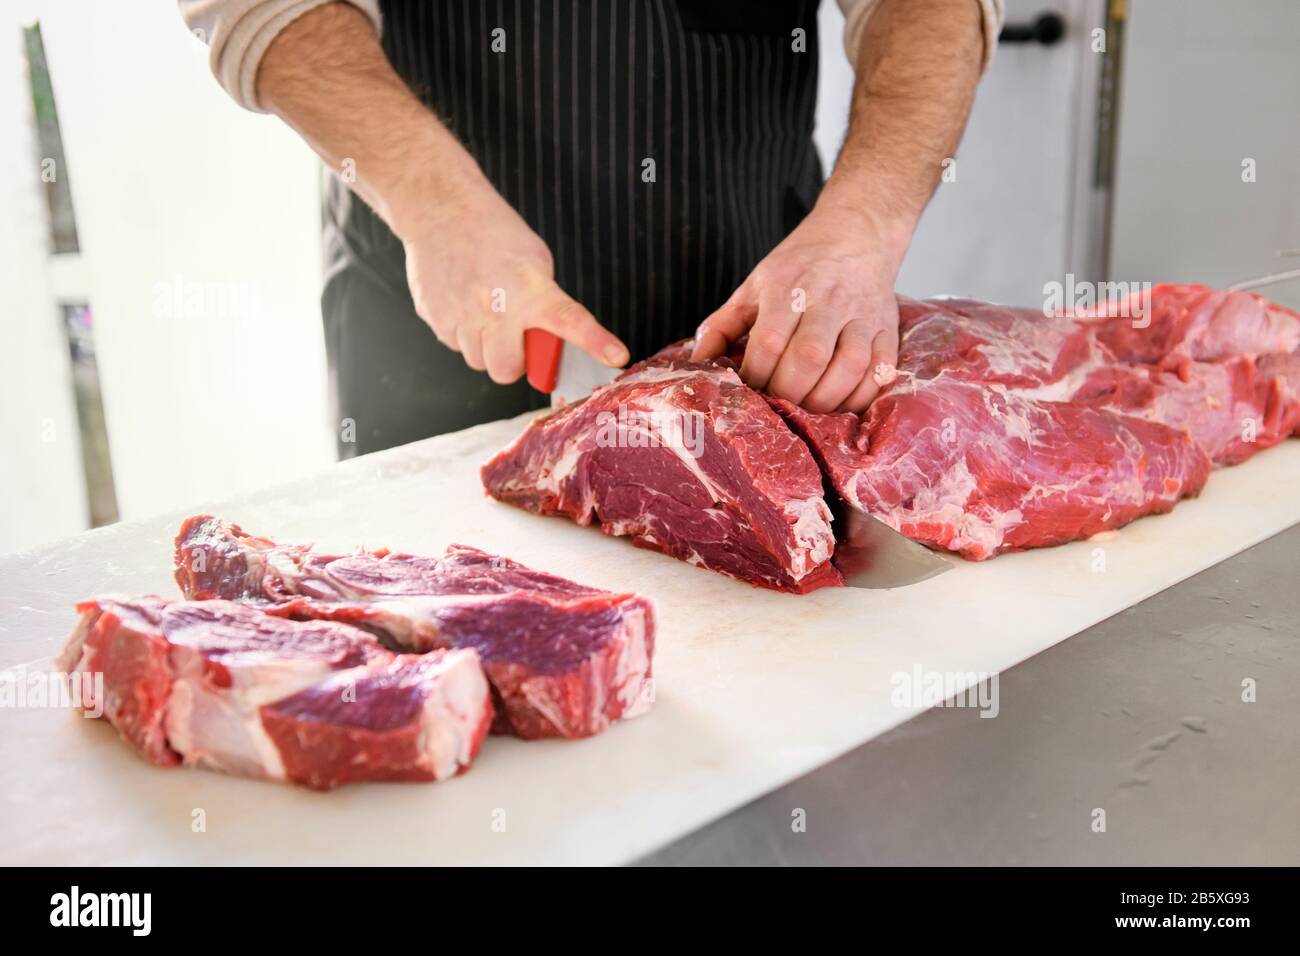 Butcher or cook slicing chuck steaks, cutting the big piece of fresh meat. Close-up view of male hands with a knife in the kitchen Stock Photo